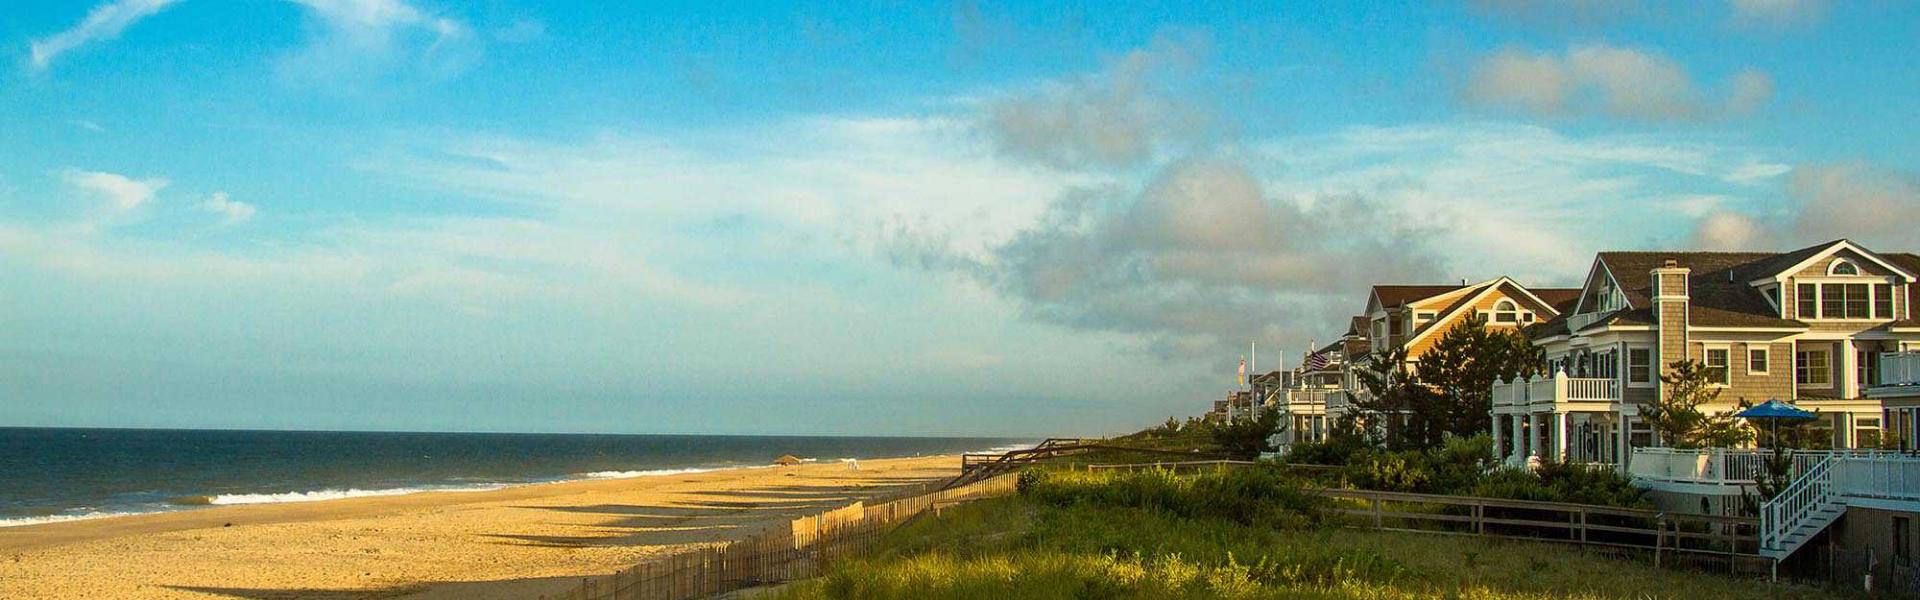 Top 12 Atlantic City Vacation Rental Locations - Tripping.com - TRIPPING